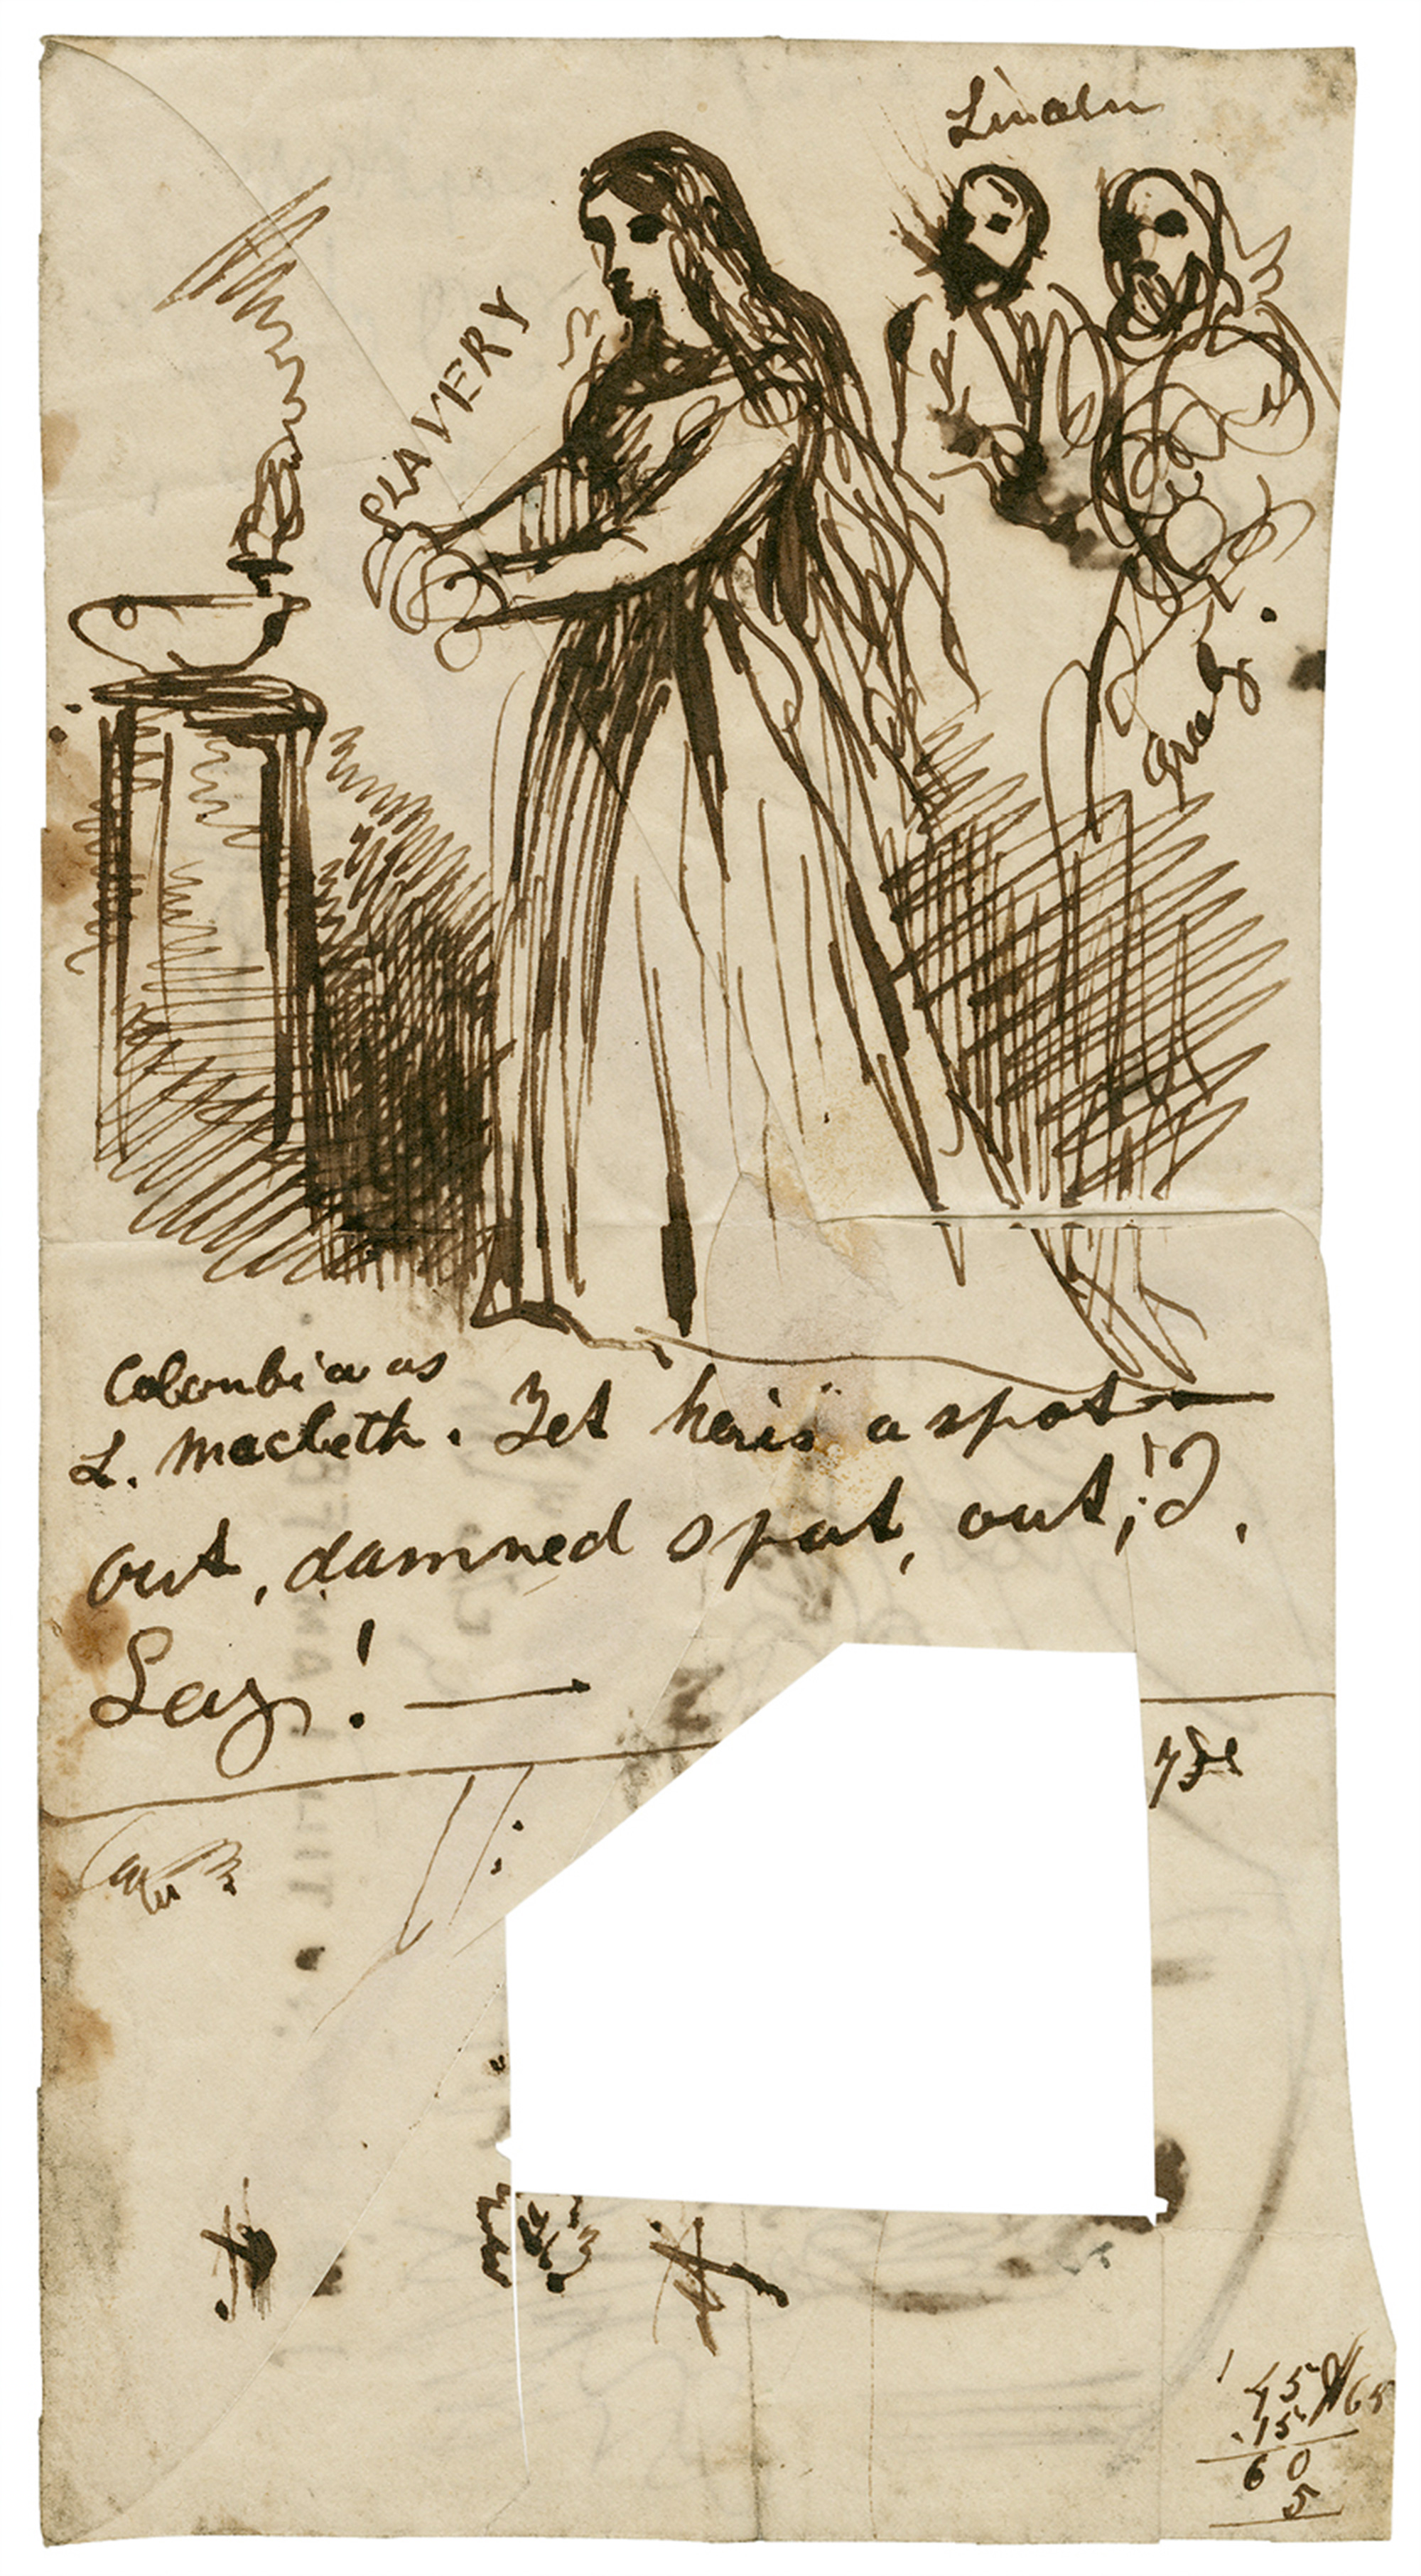 The ineradicable stain. Lady Macbeth’s eternal guilt, used here as an allegory for America’s inability to wash away the sins of slavery. Courtesy Folger Shakespeare Library.